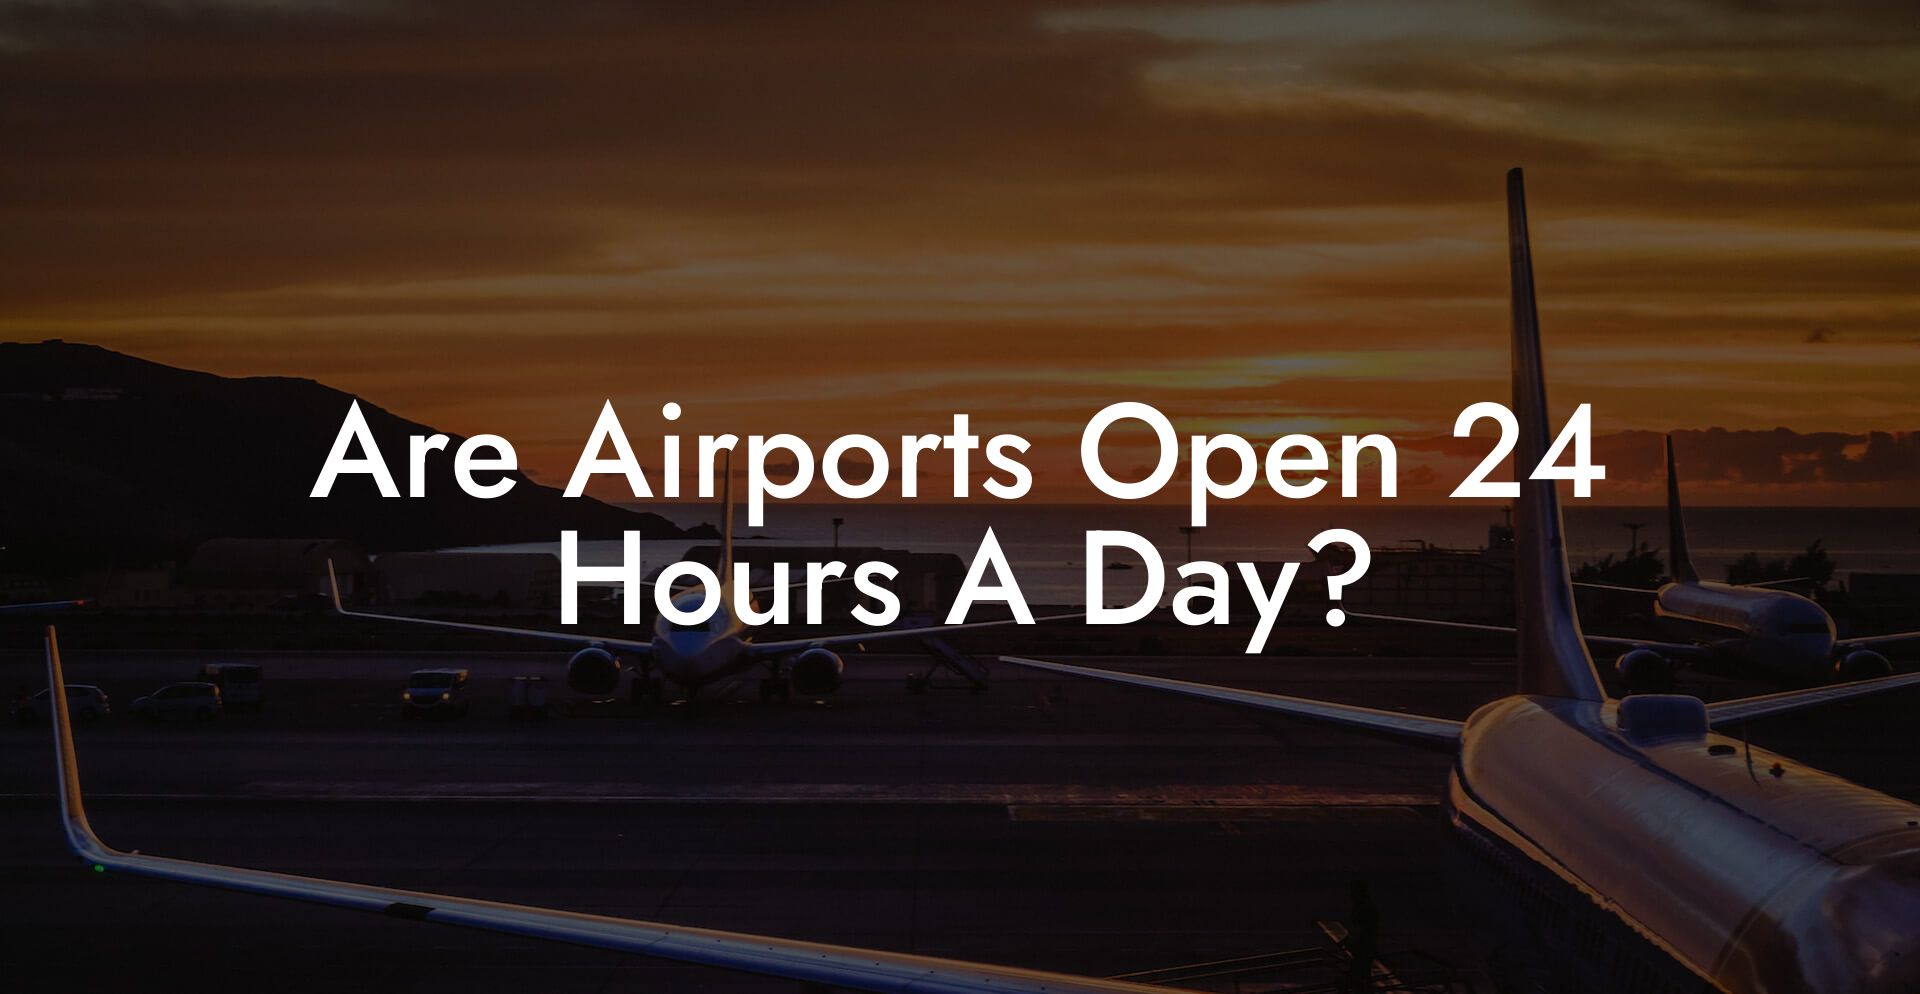 Are Airports Open 24 Hours A Day?